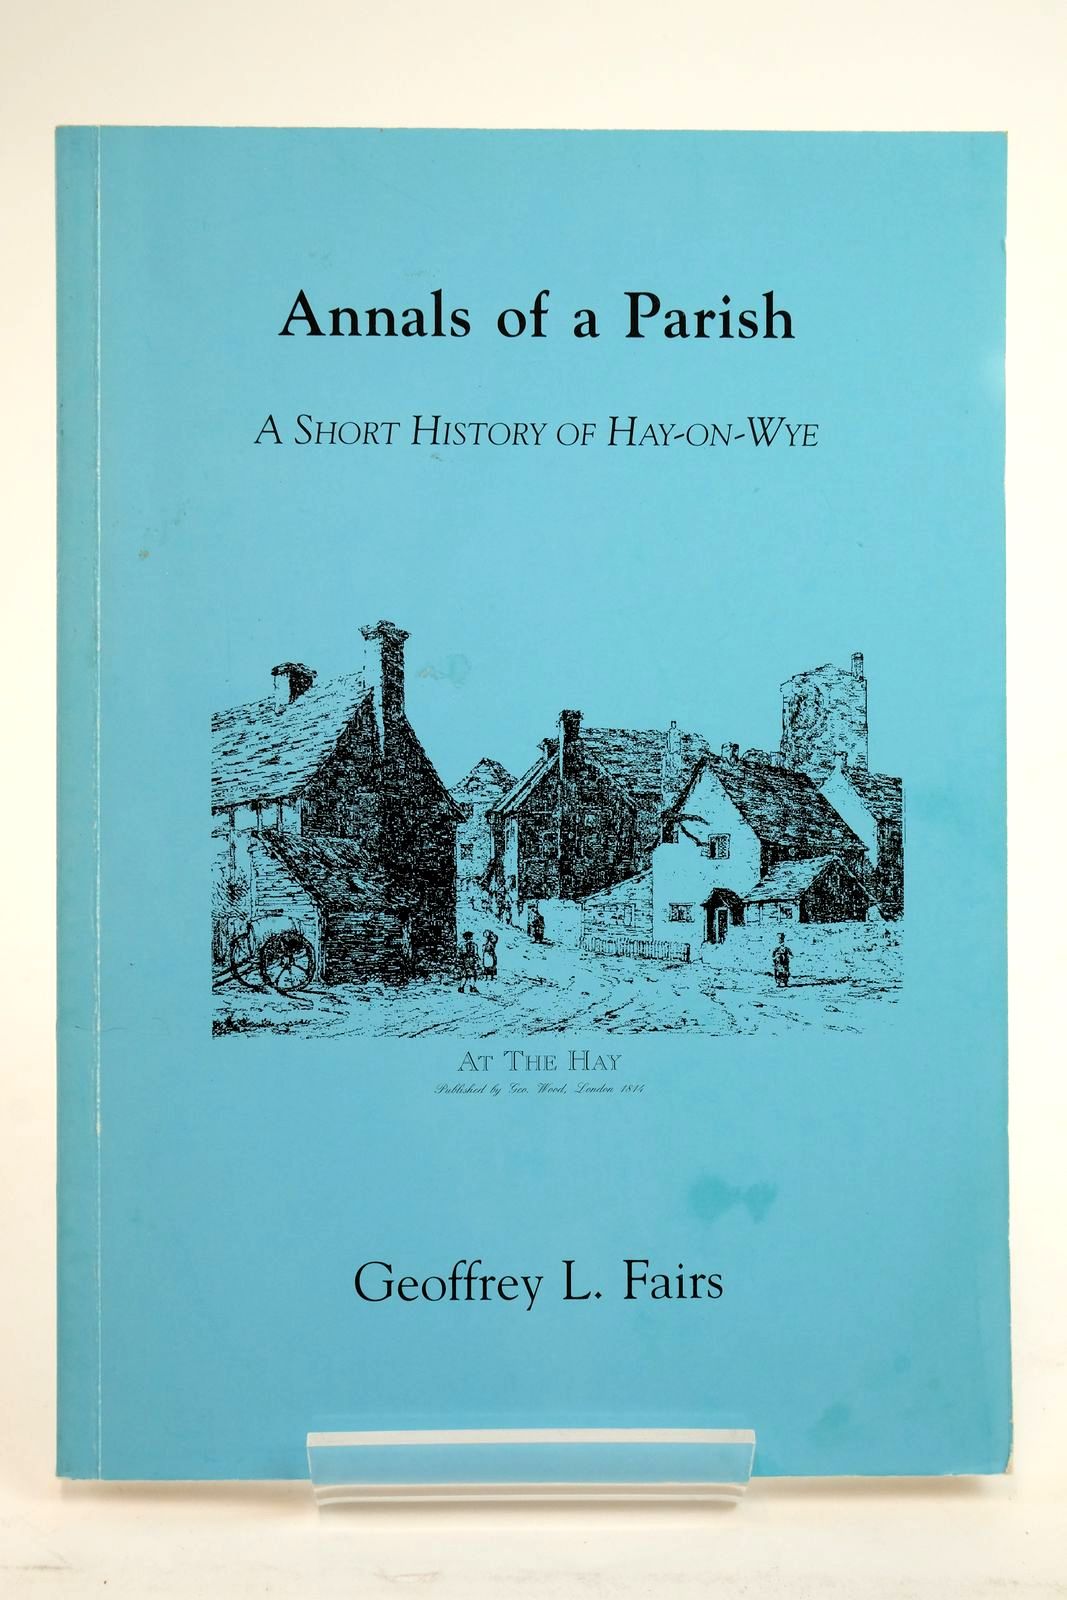 Photo of ANNALS OF A PARISH written by Fairs, Geoffrey L. published by Geoffrey L. Fairs (STOCK CODE: 2135429)  for sale by Stella & Rose's Books